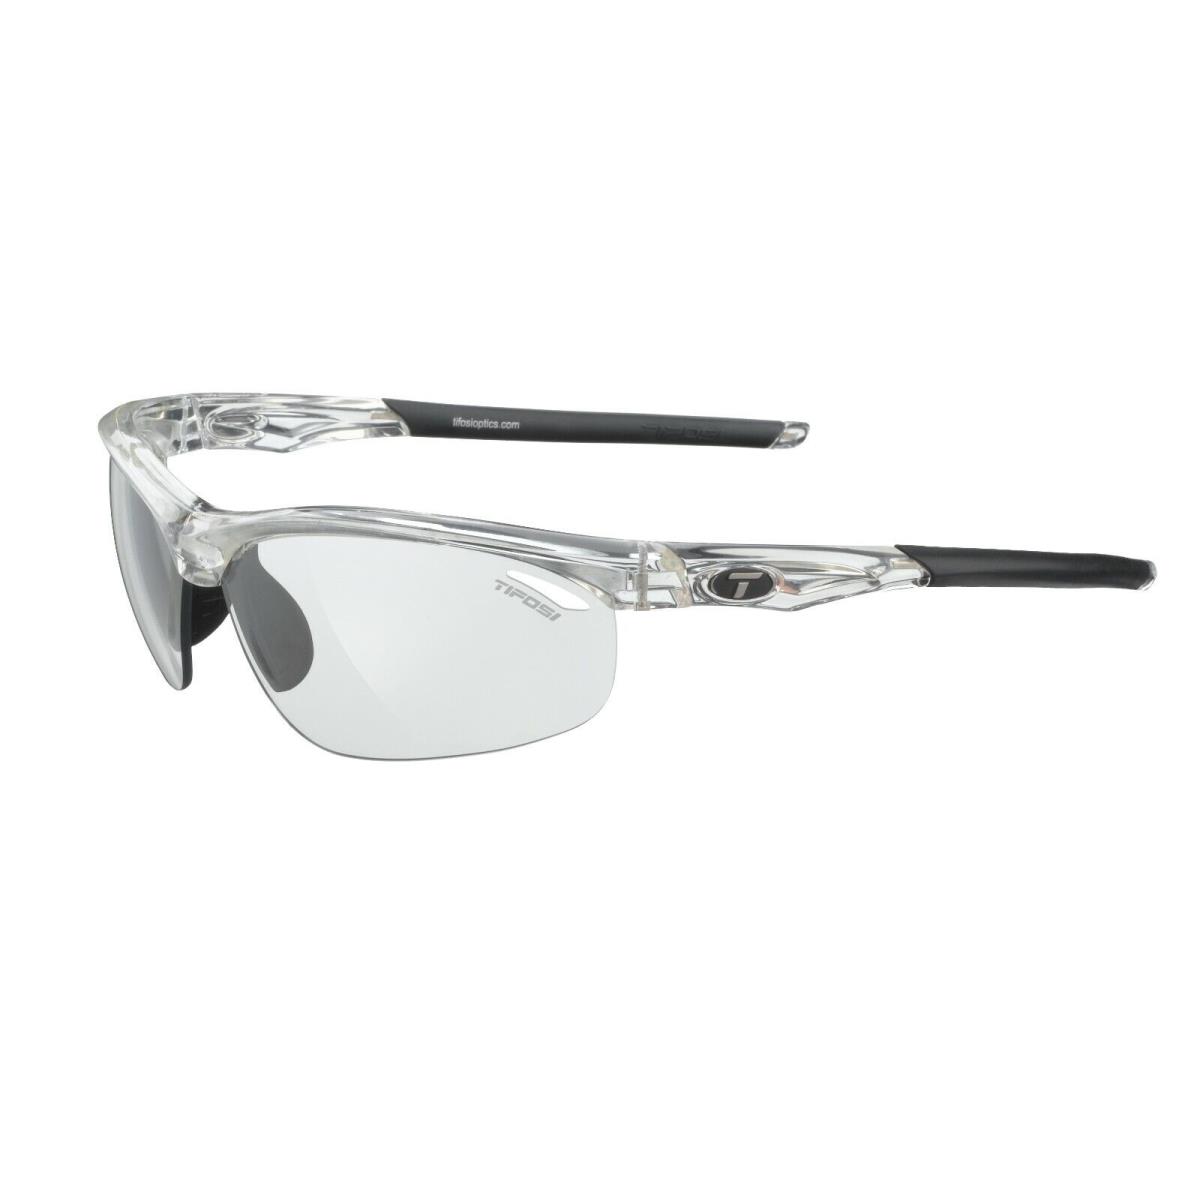 Tifosi Veloce Black Crystal Blue Tactical Sunglasses Read Greens Choose Style Crystal Clear LtNight FOTOTEC